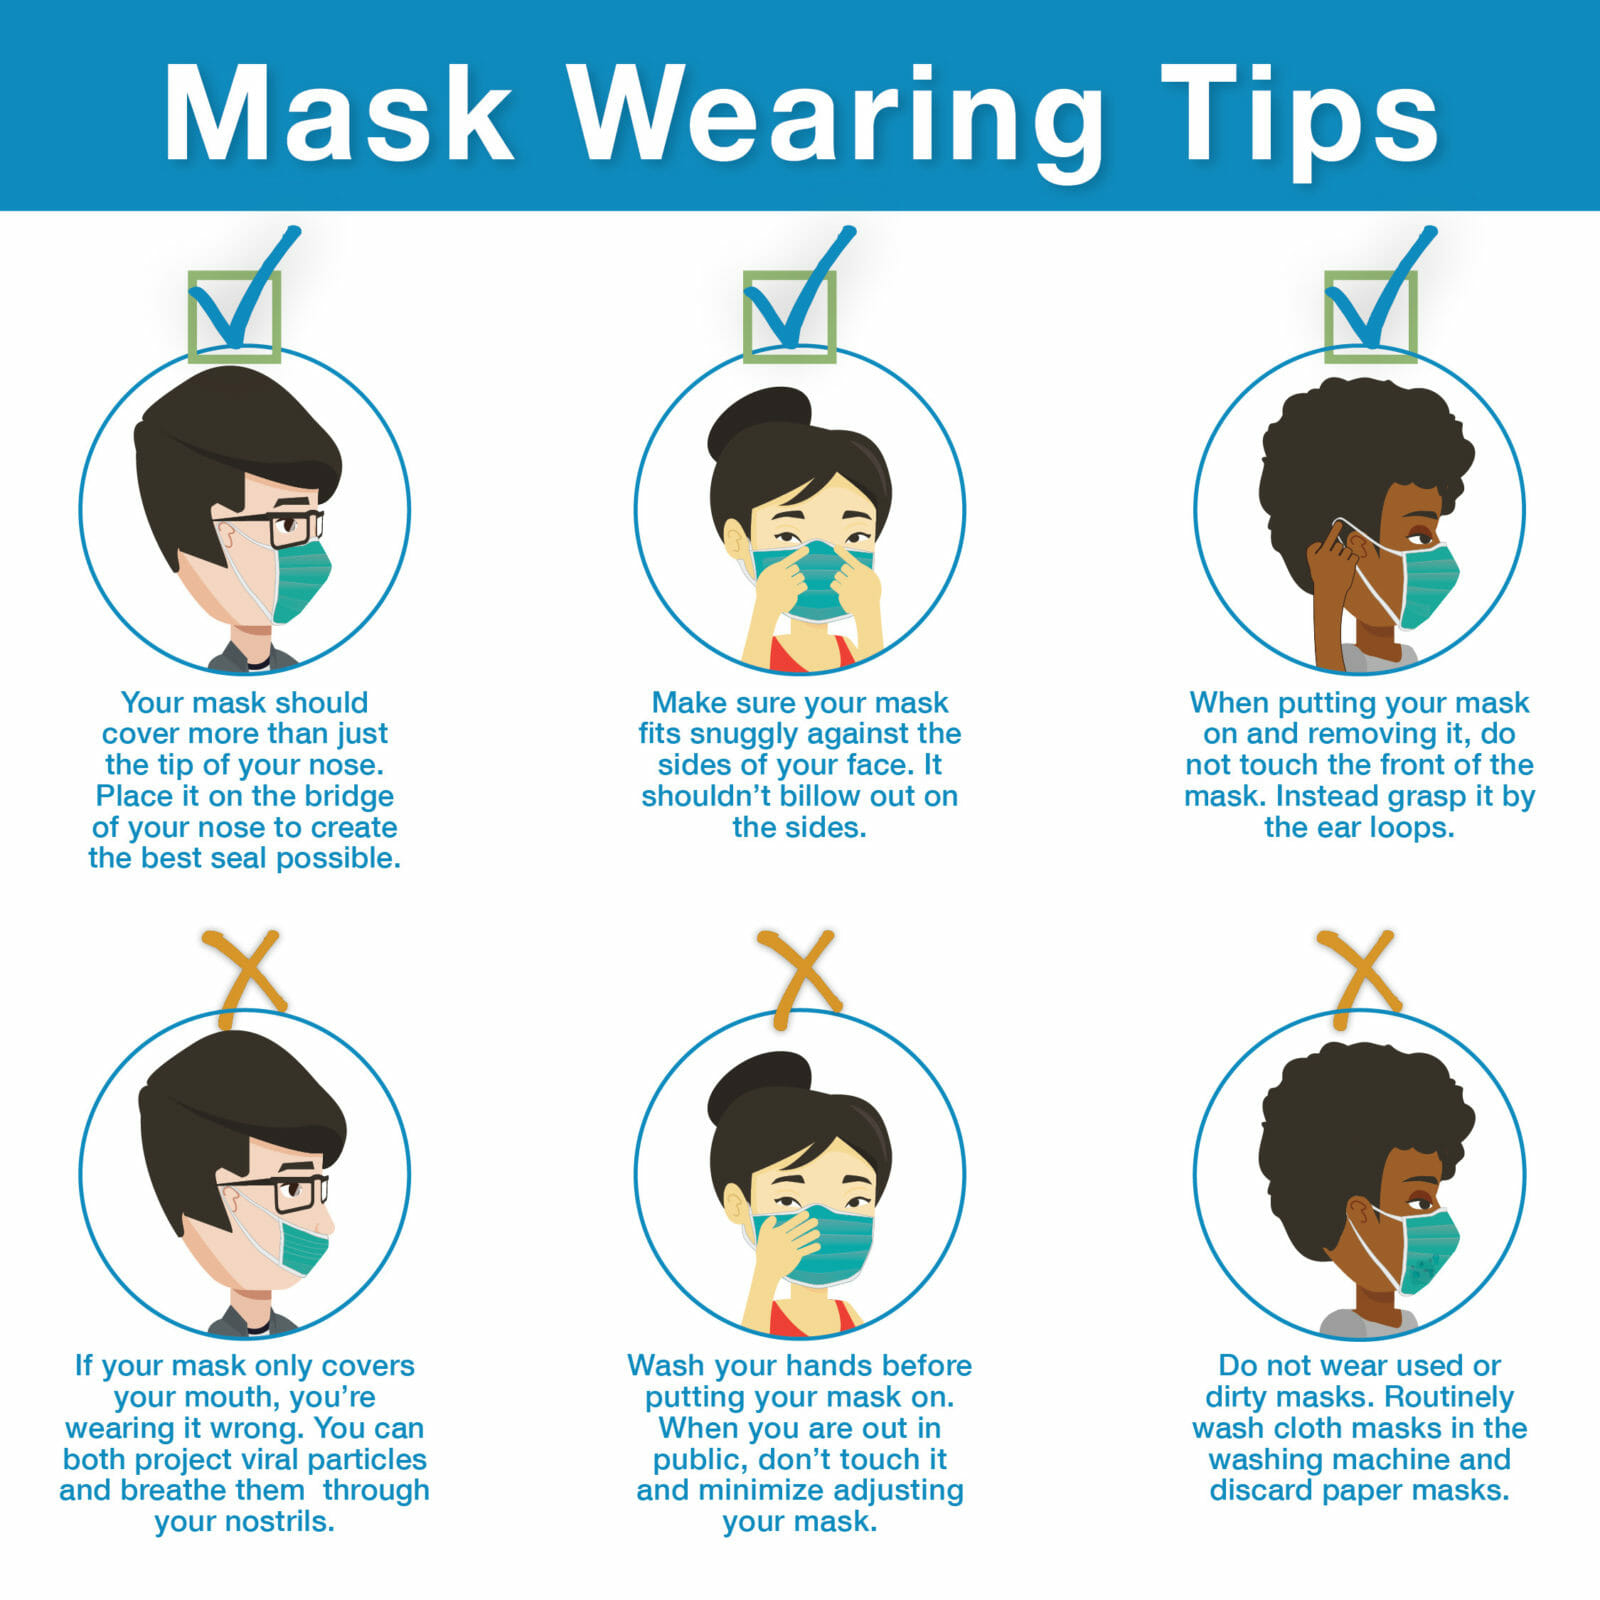 Are You Wearing Your Mask Properly? | LifeSource